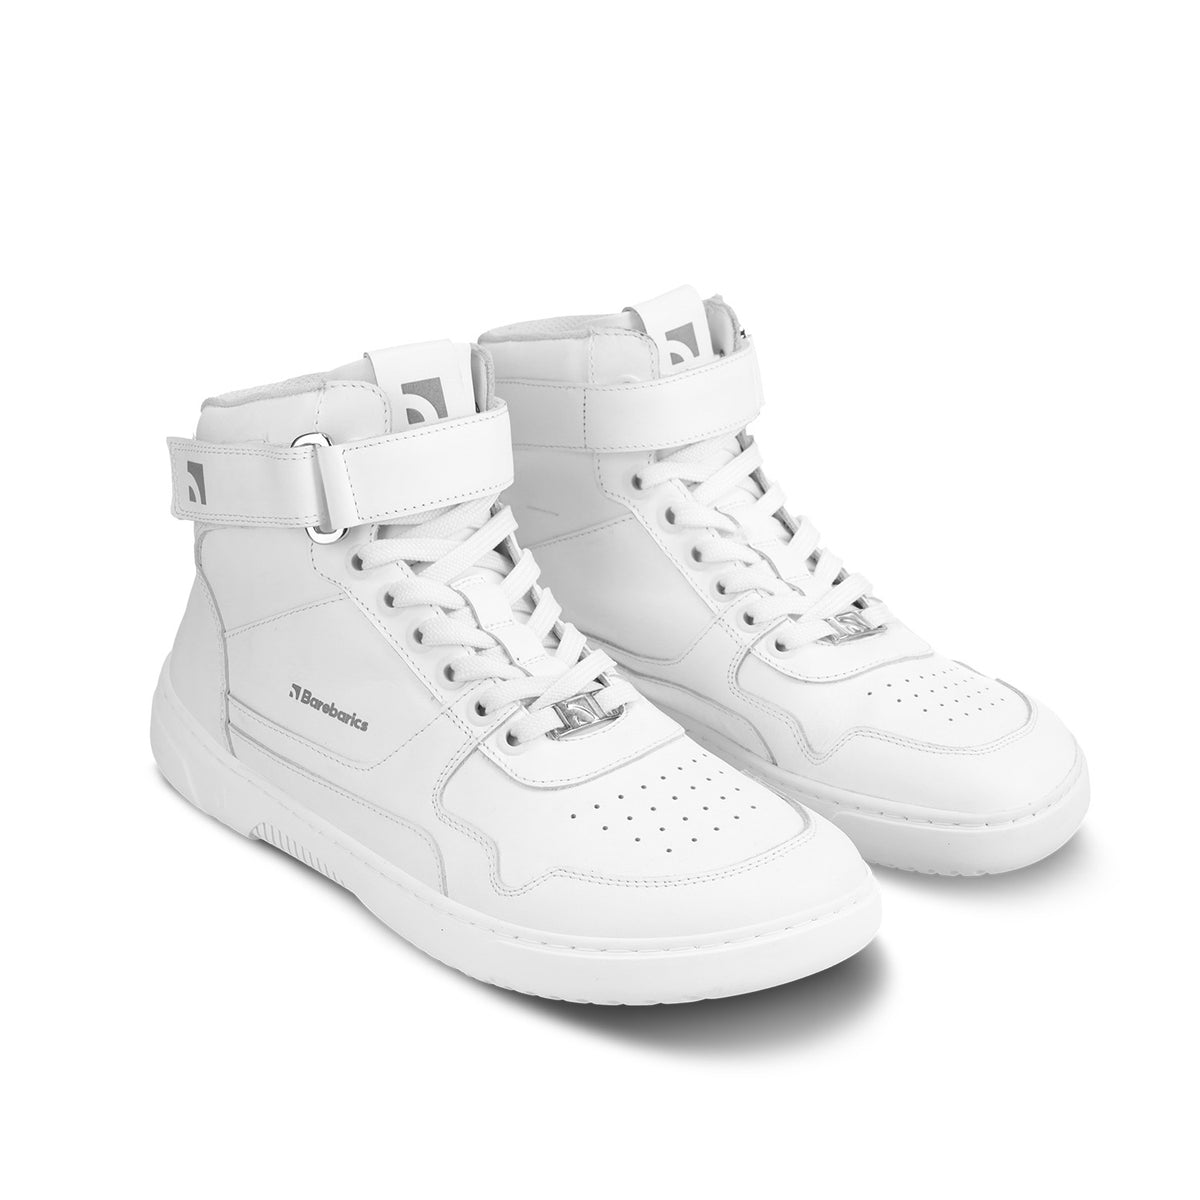 Barefoot Sneakers Barebarics Zing - High Top - All White - Leather 4  - OzBarefoot